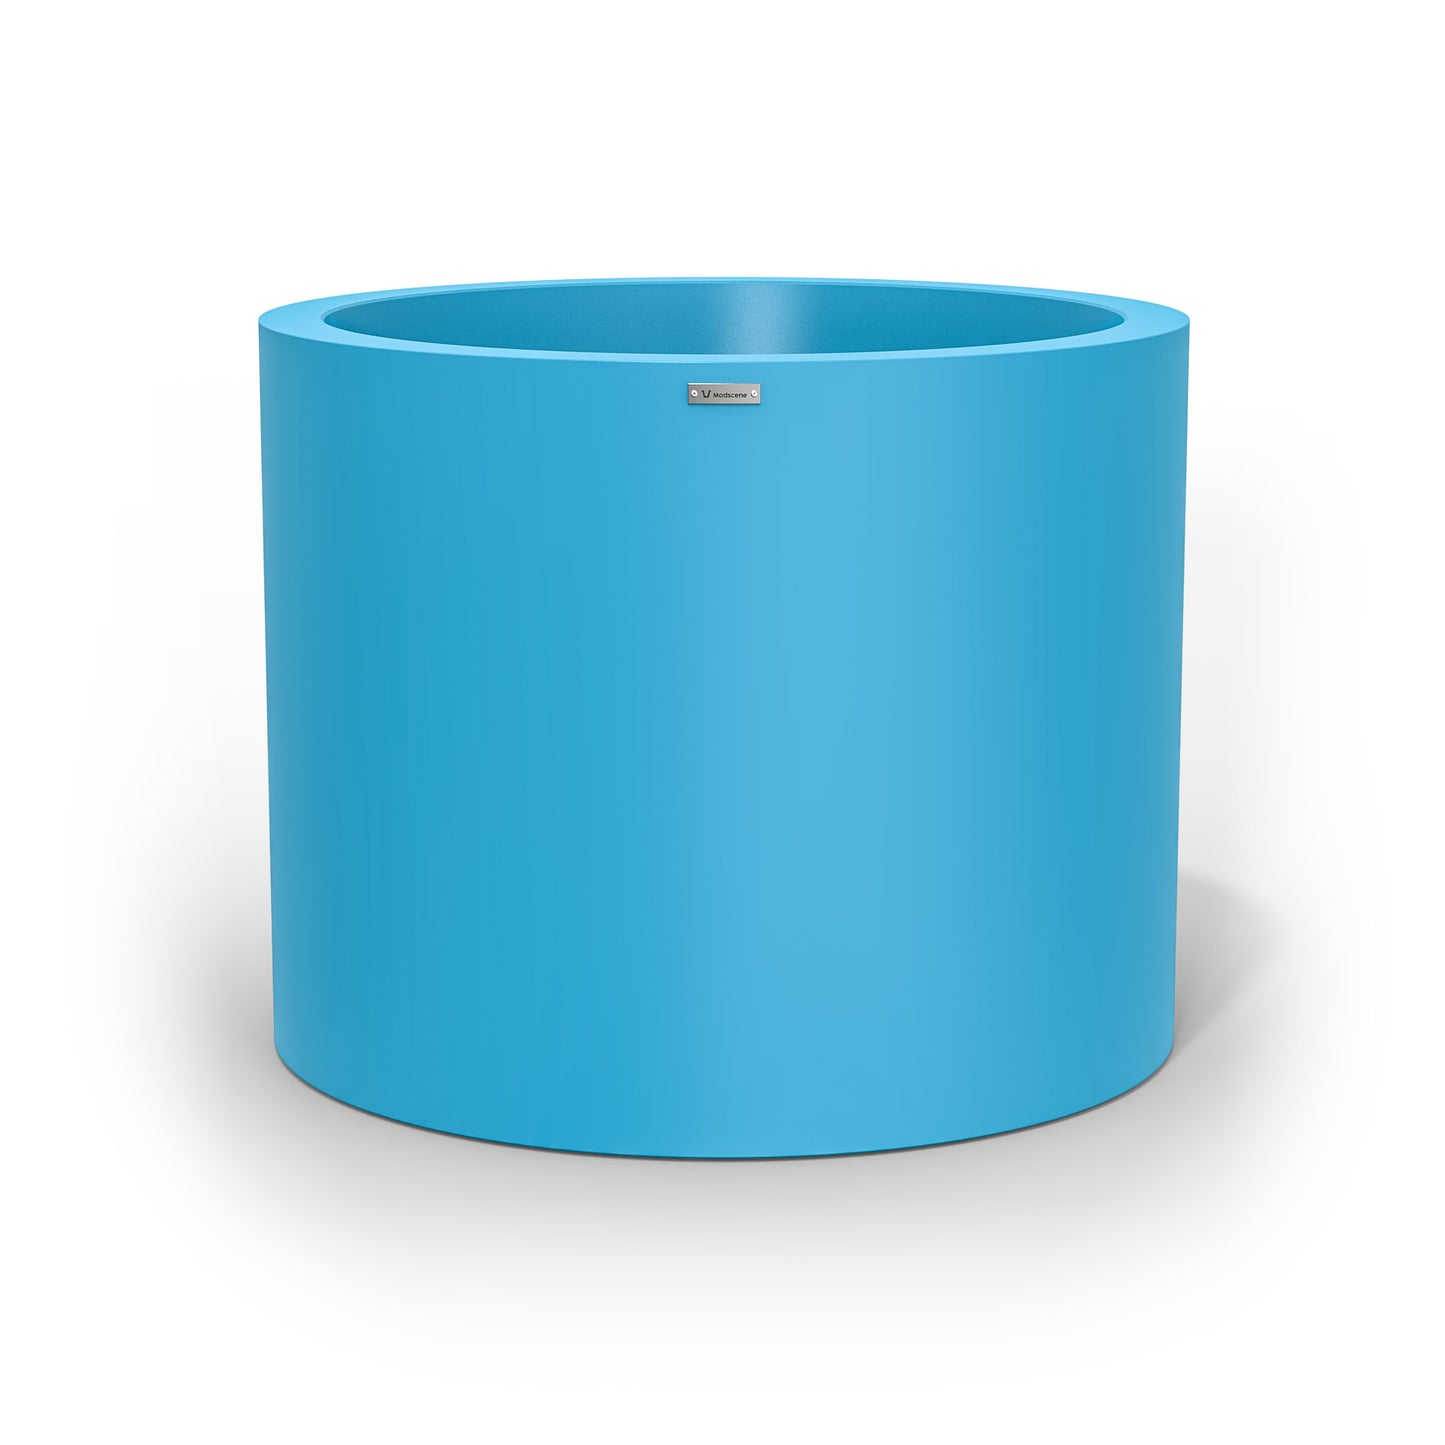 An extra large cylinder pot planter in blue. Made by Modscene NZ.